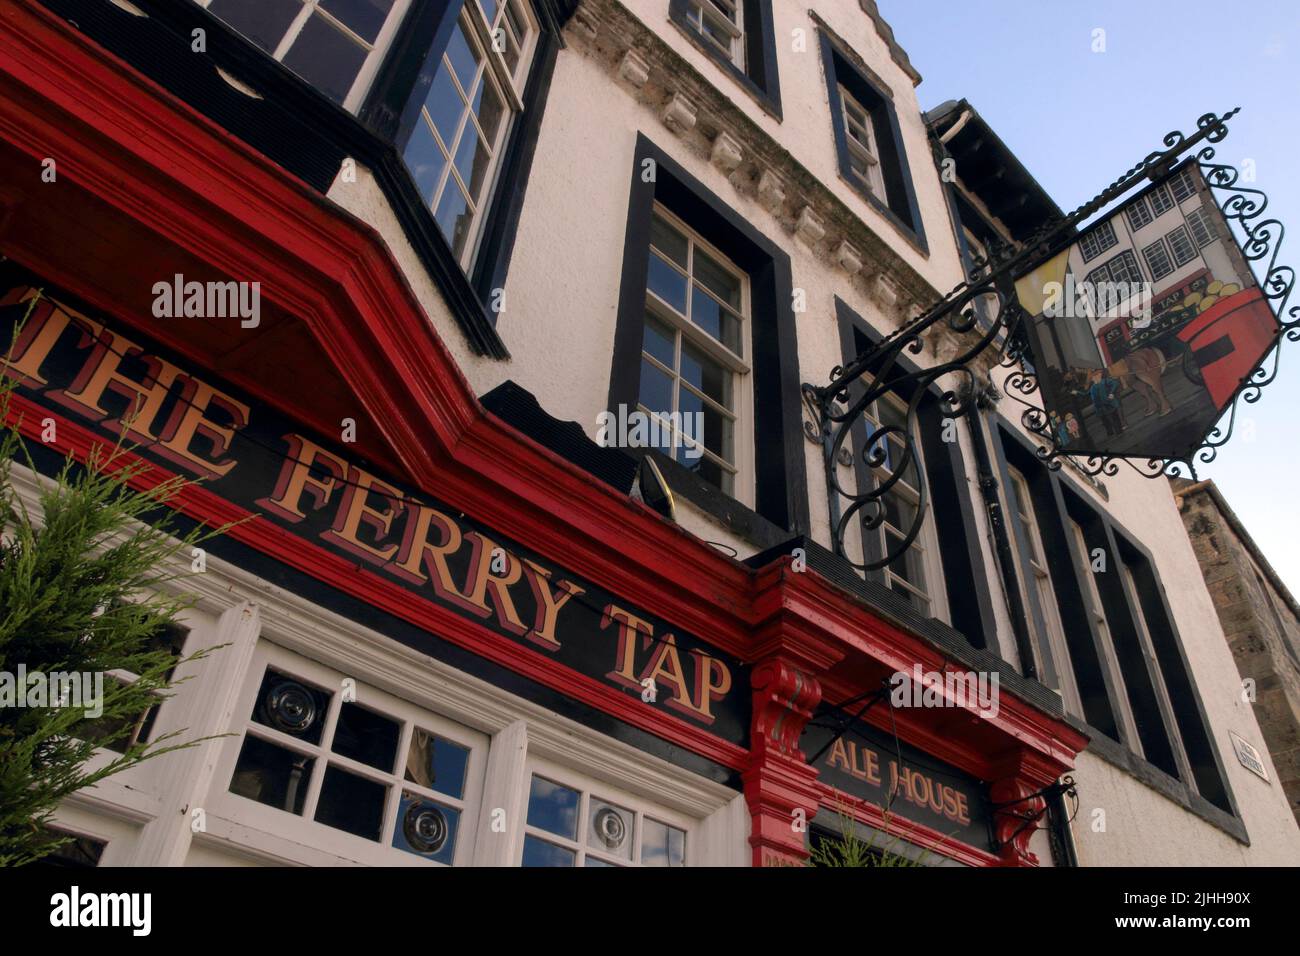 The Ferry Tap pub, South Queensferry, Lothian, Scotland, UK Stock Photo